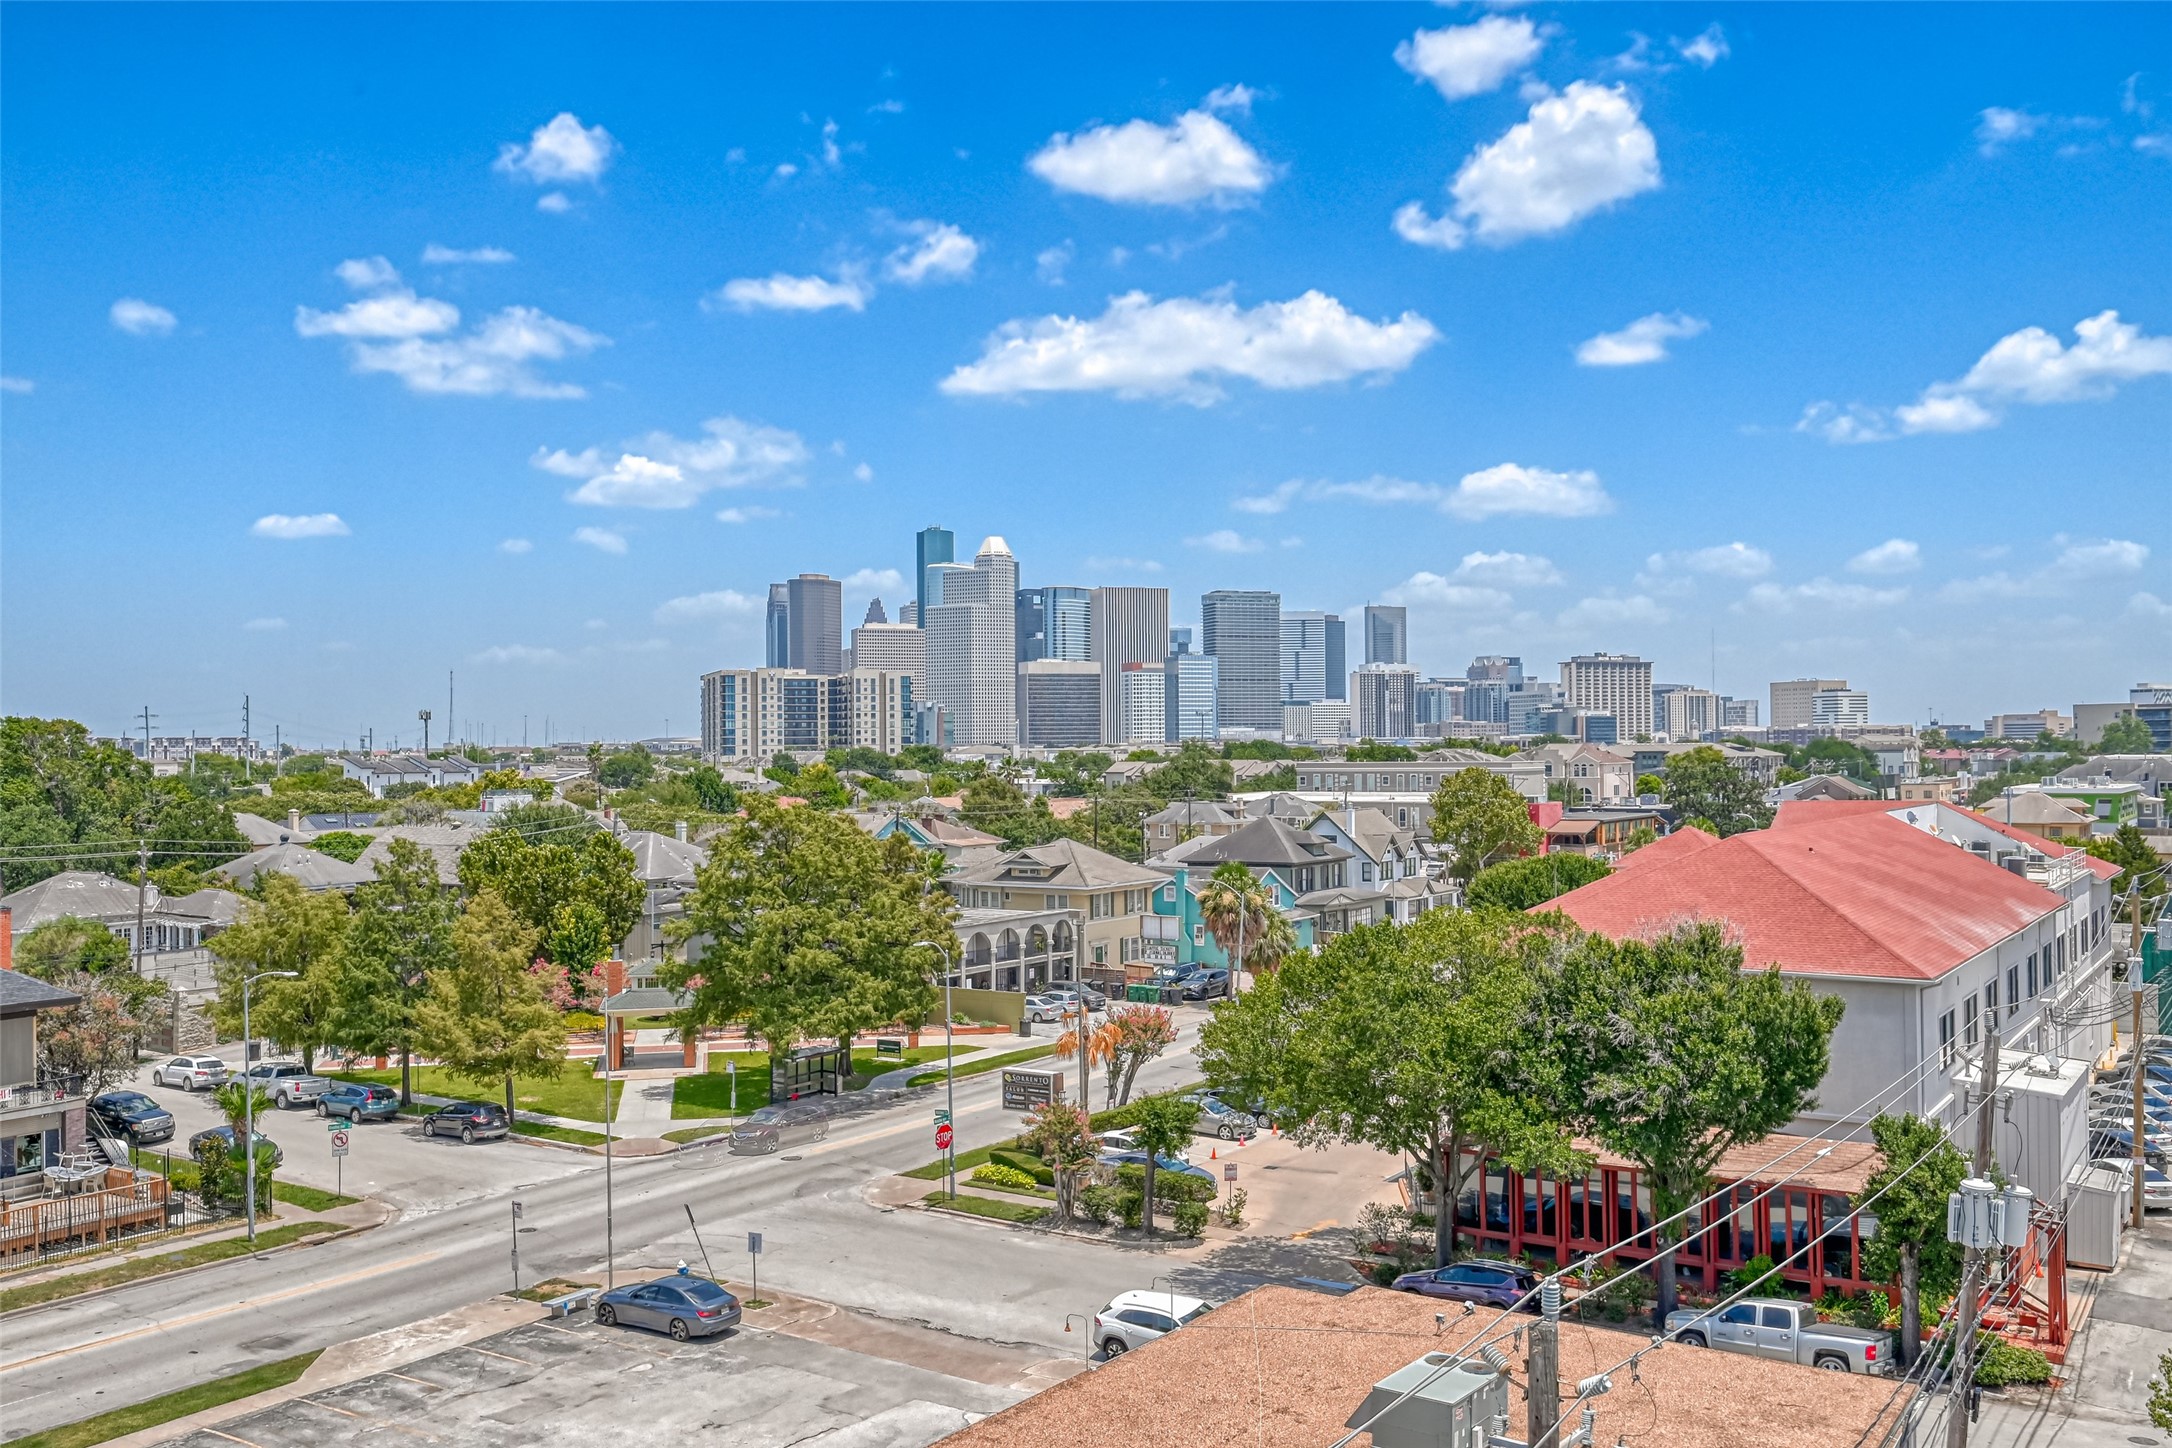 This view can be yours! Residents of Lovett Place enjoy this amazing view anytime they wish! It is an almost 360-degree view of the city.